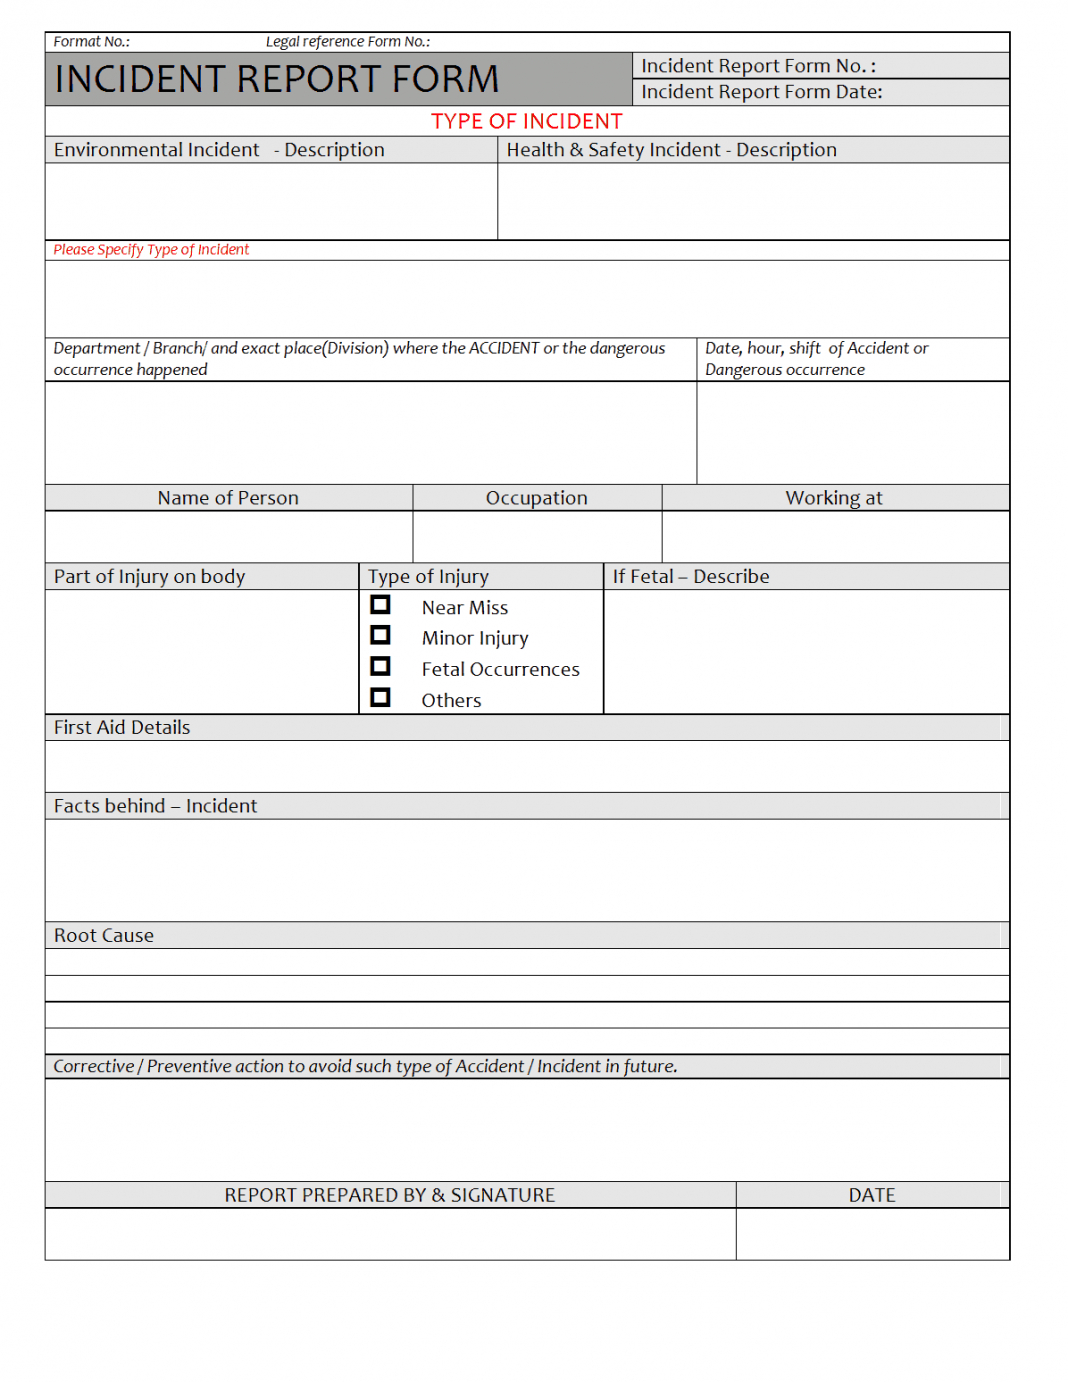 Sample Monthly Health And Safety Report Format Annual Throughout Annual Health And Safety Report Template